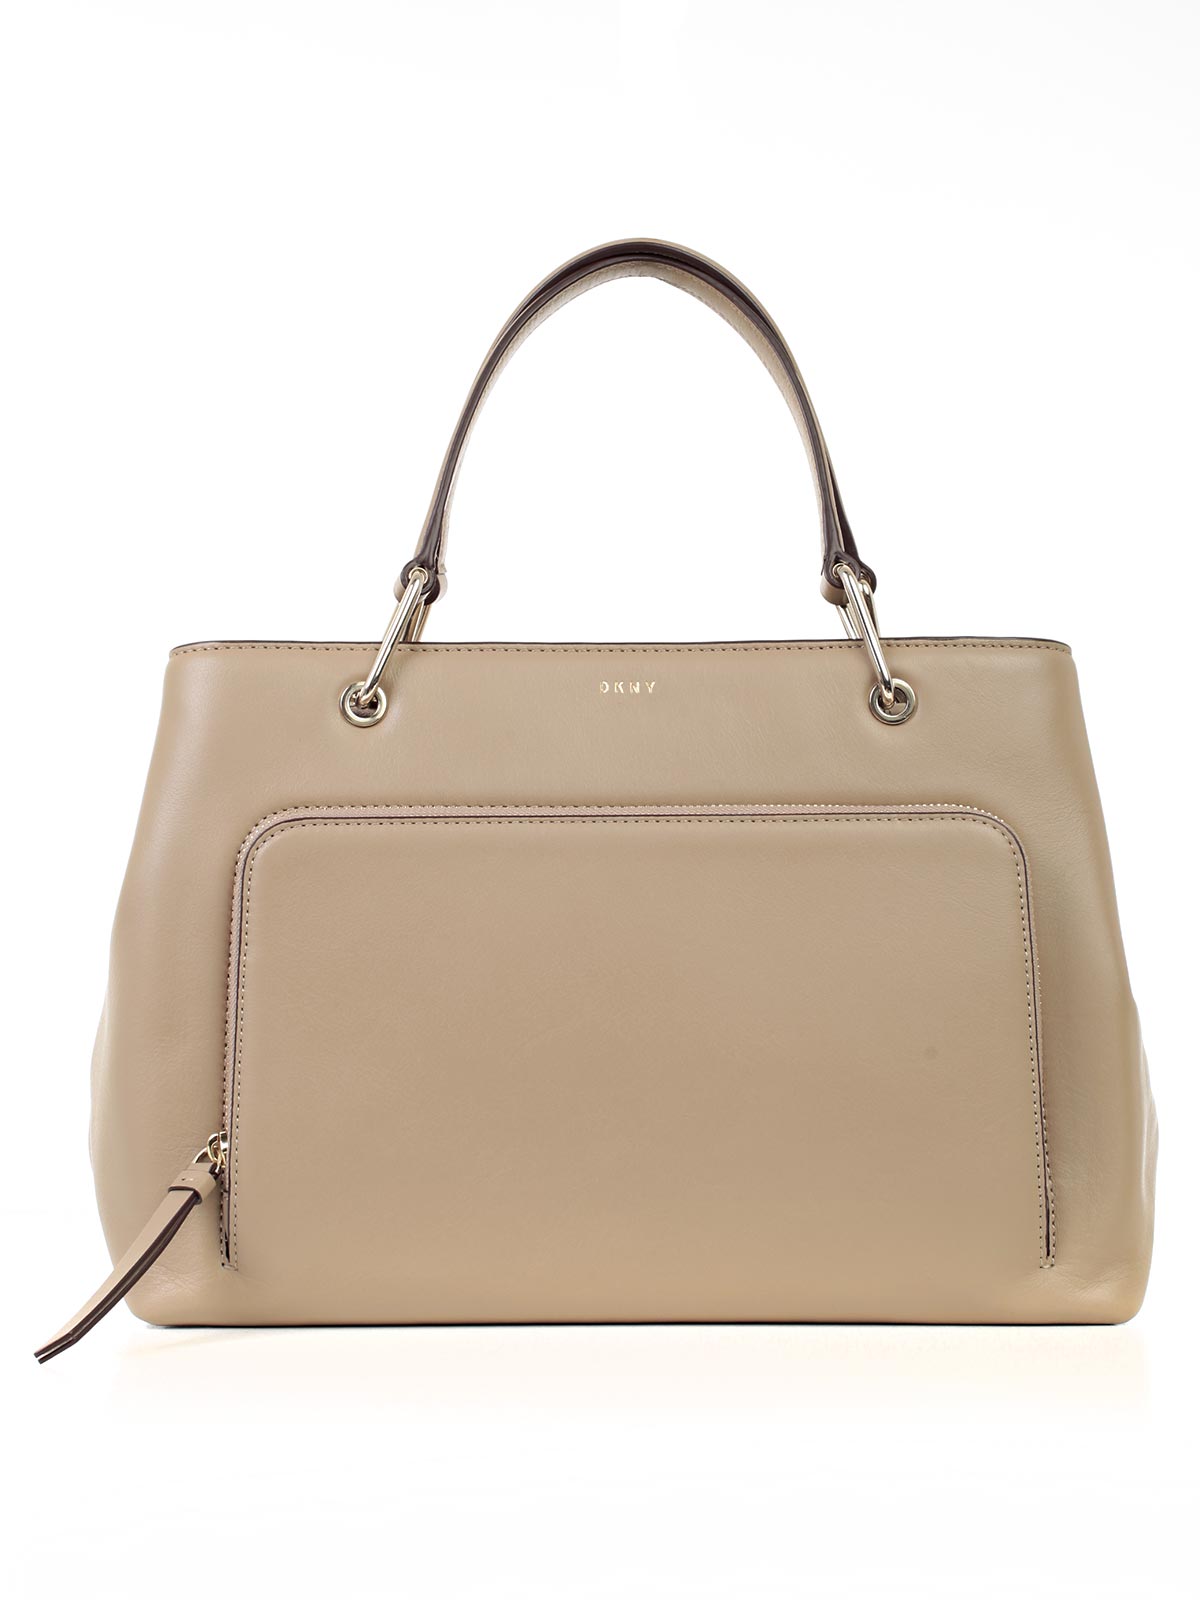 picture of dkny bag UTUXYWS